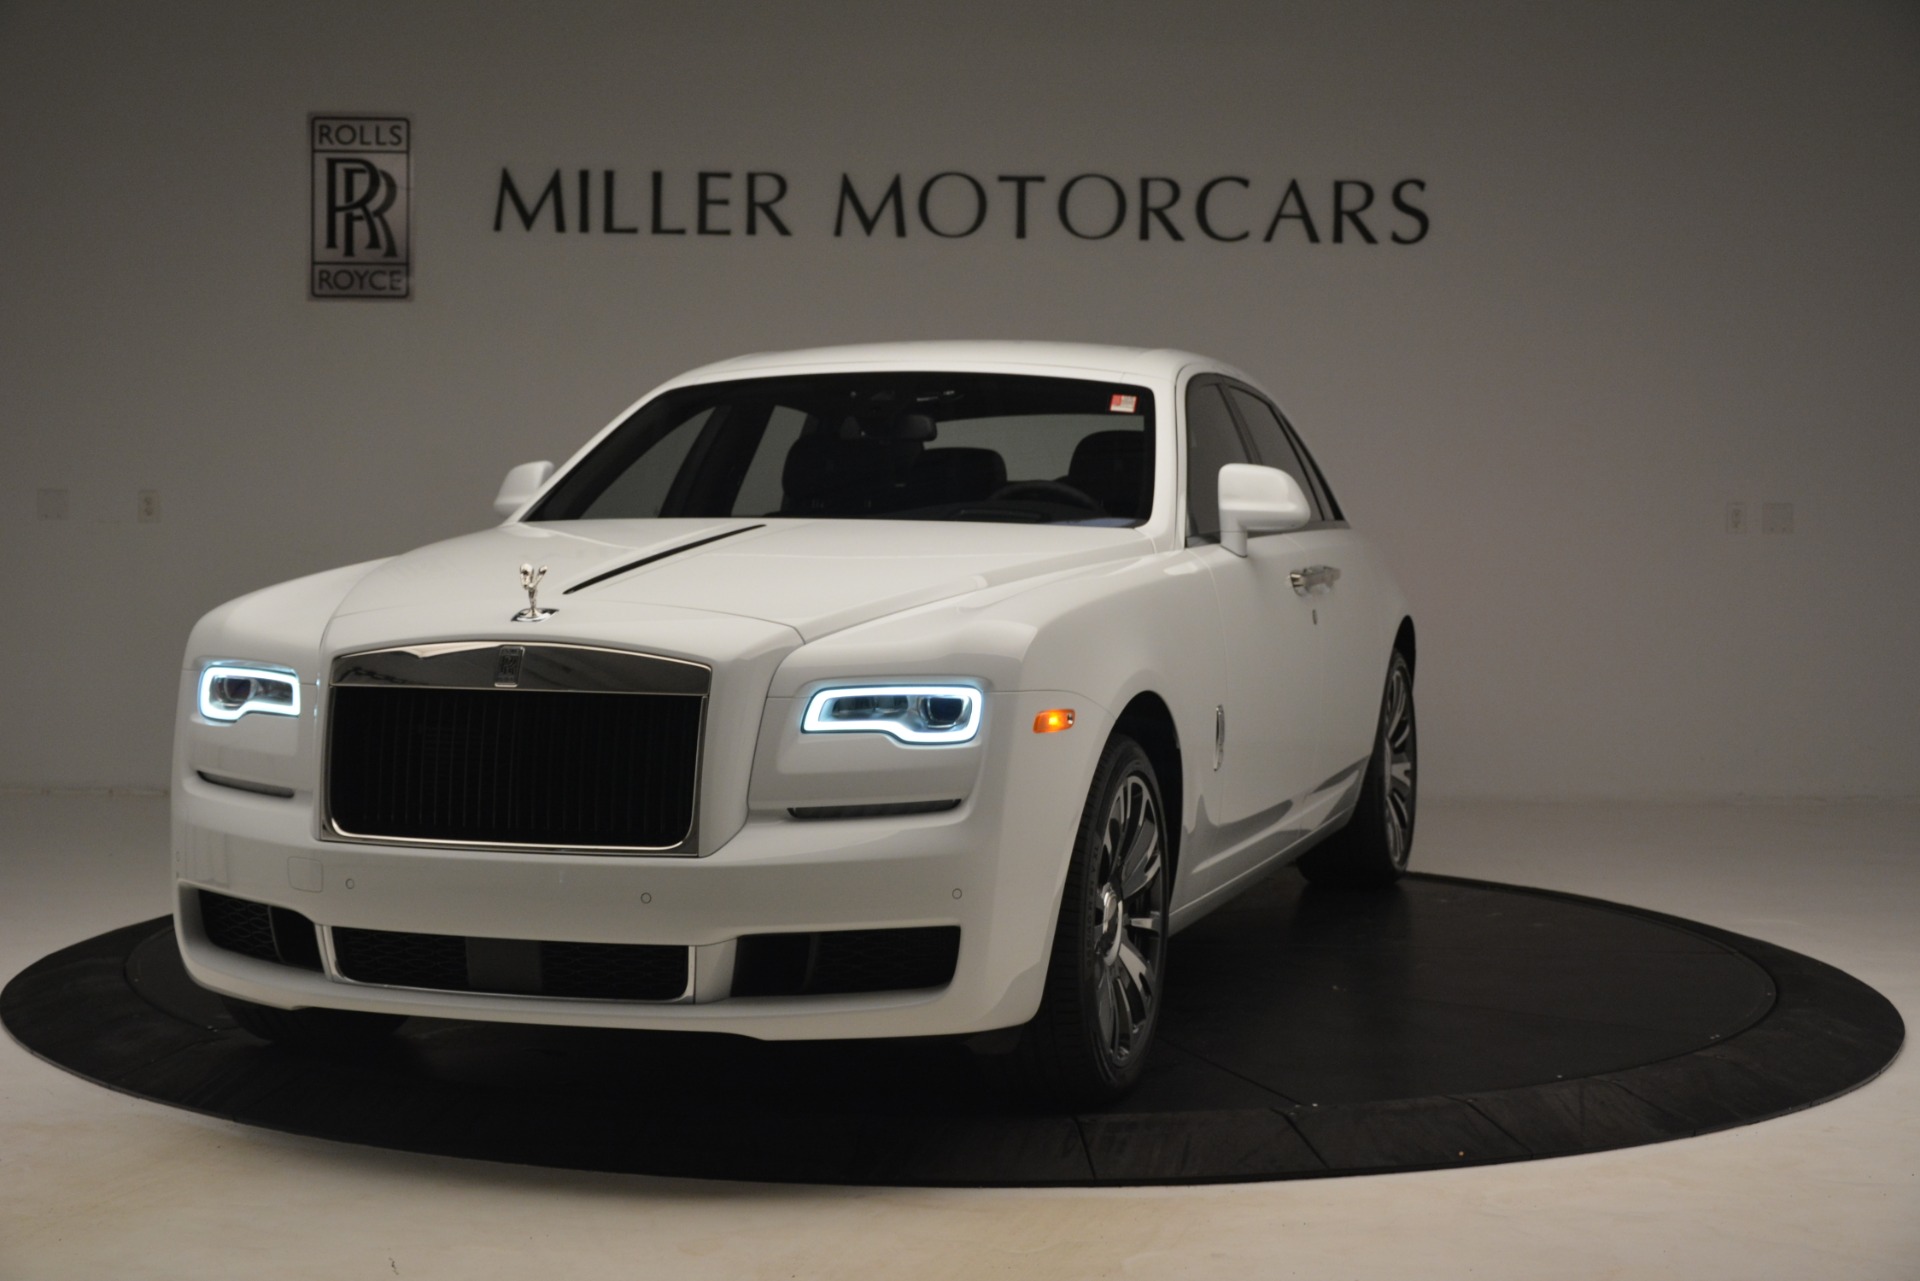 New 2019 Rolls-Royce Ghost for sale Sold at Aston Martin of Greenwich in Greenwich CT 06830 1